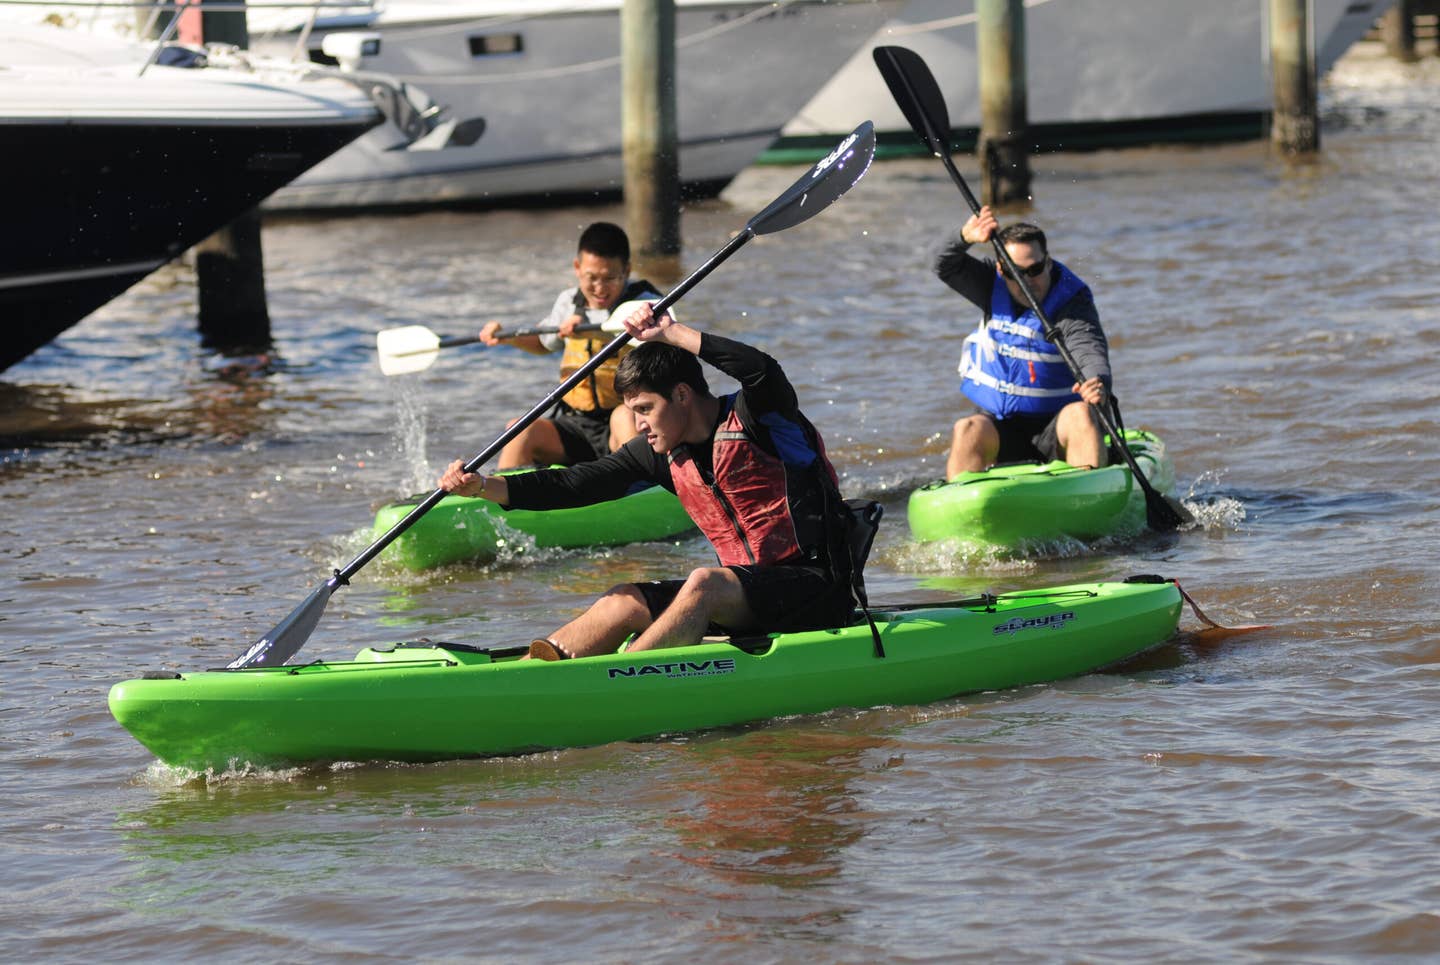 Second Lt. Jonathan Eng steers his kayak through the Keesler Marina as he is followed closely by 2nd Lt. Kyung Kim and Staff Sgt. Grant Coomes in the kayak races during the third annual Polar Bear Regatta Jan. 24, 2015, at marina park, Keesler Air Force Base, Miss.  Eng and Kim are students and Coomes is an instructor in the 333rd Training Squadron cyber warfare operations course. The event was sponsored by outdoor recreation.  (U.S. Air Force photo by Kemberly Groue/Released)